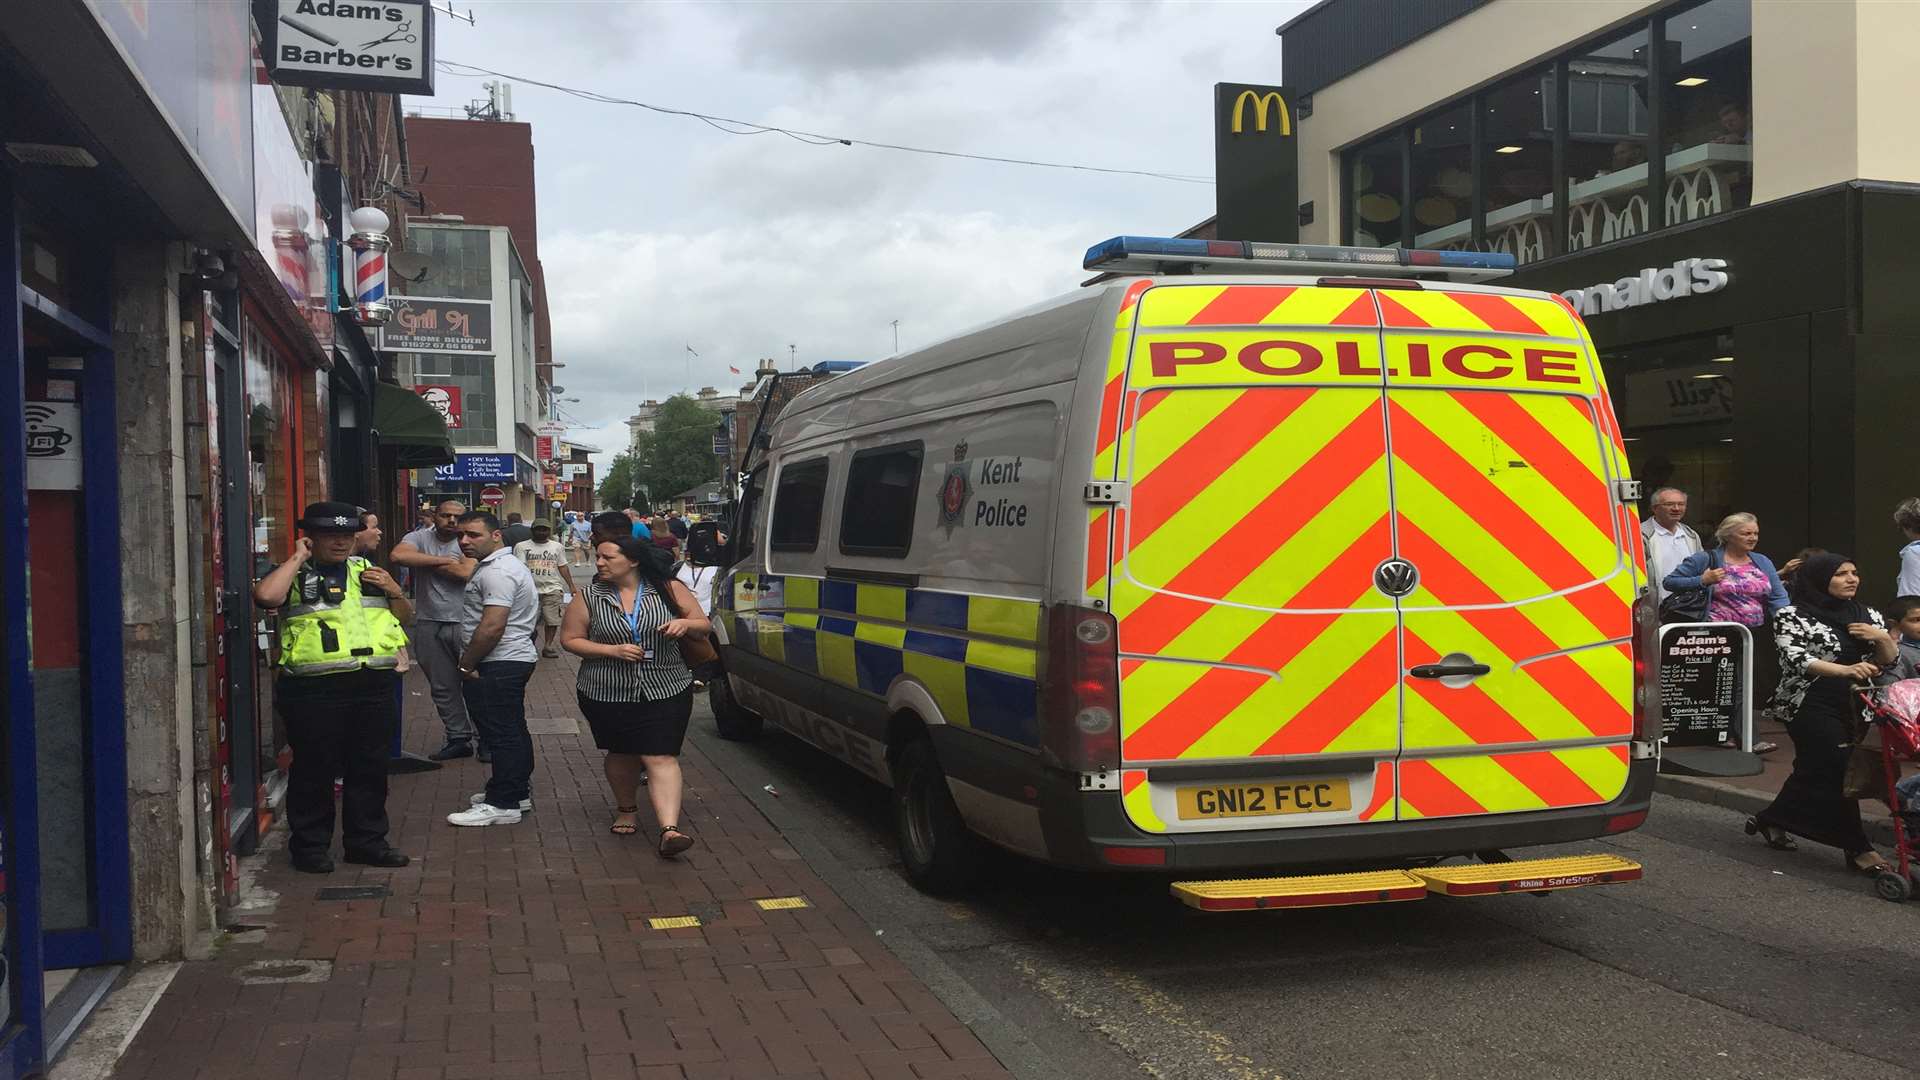 More than a dozen police and immigration officers stormed the barbers